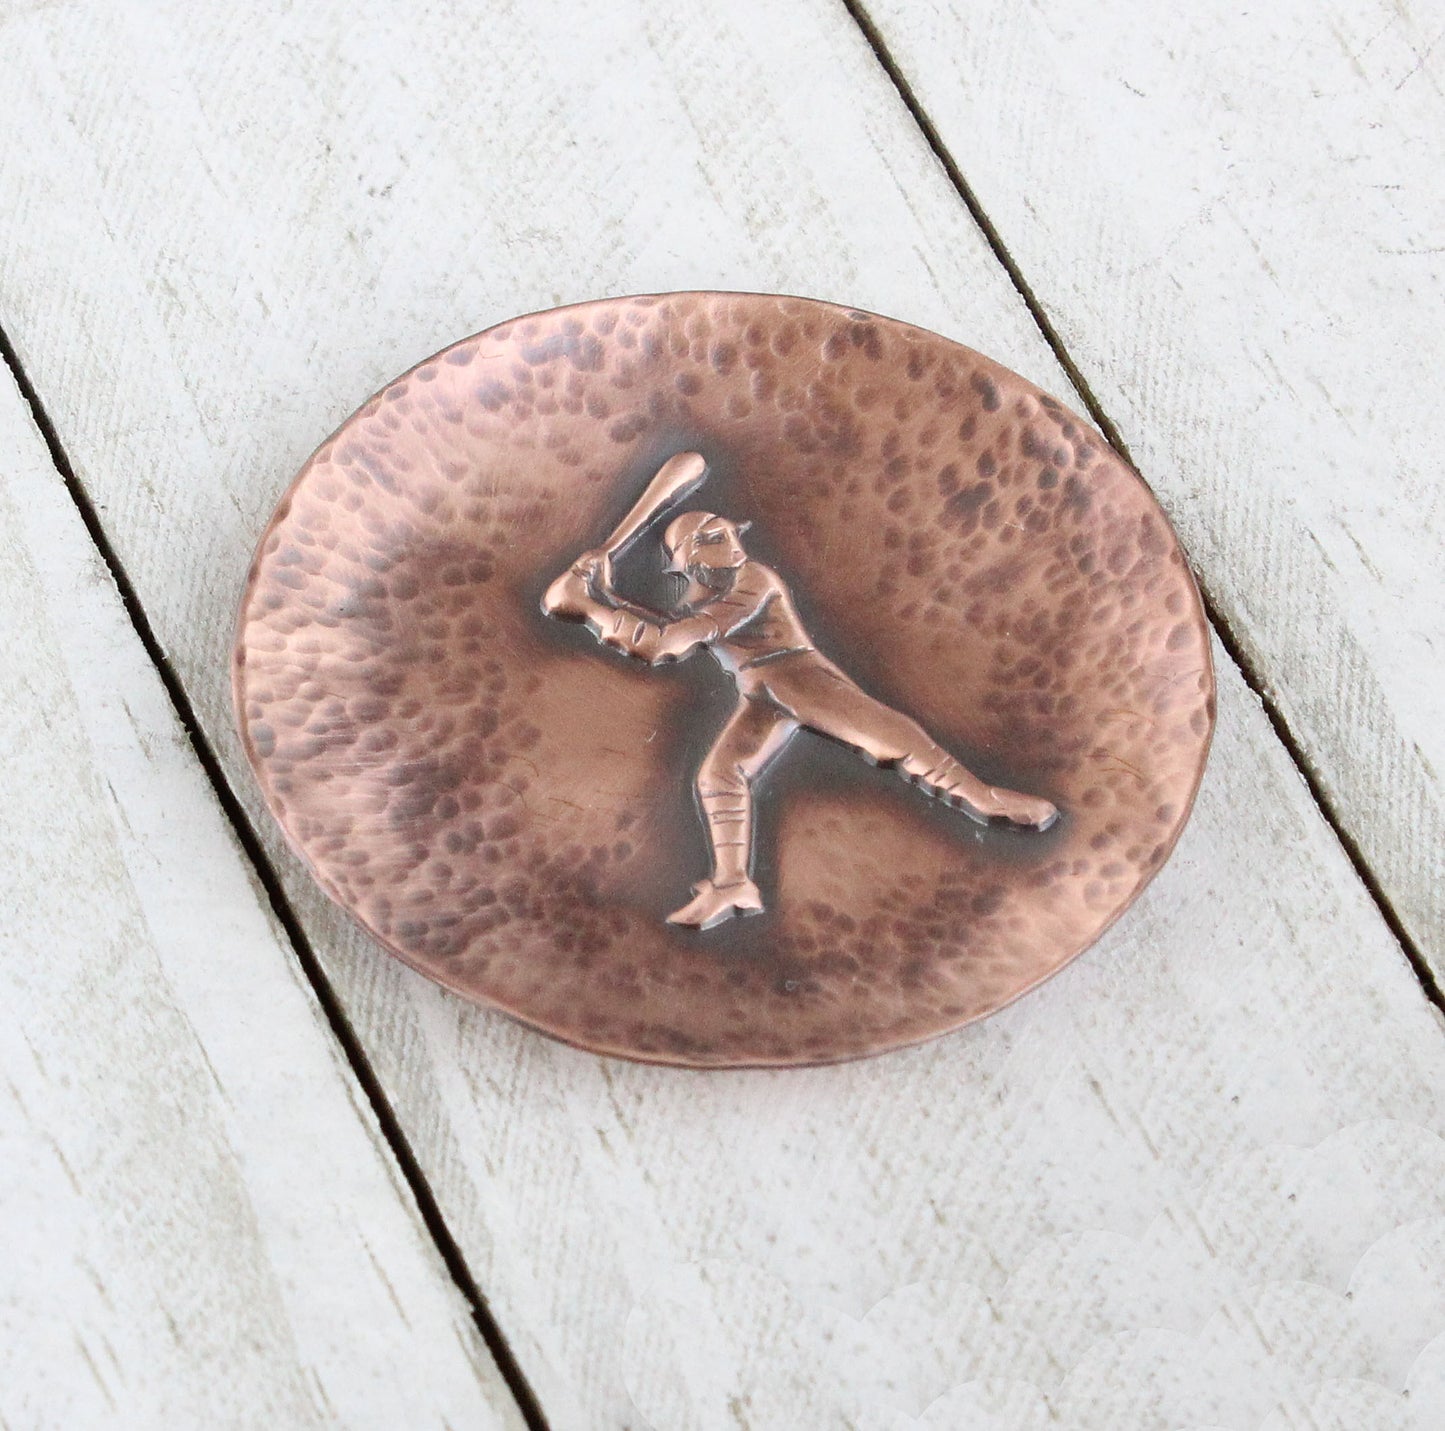 Small copper ring or trinket dish with raised impression of an old time baceball player at bat. The dish edges have a hsammered dappled texture and the edges are slightly curved up to form a shallow bowl.